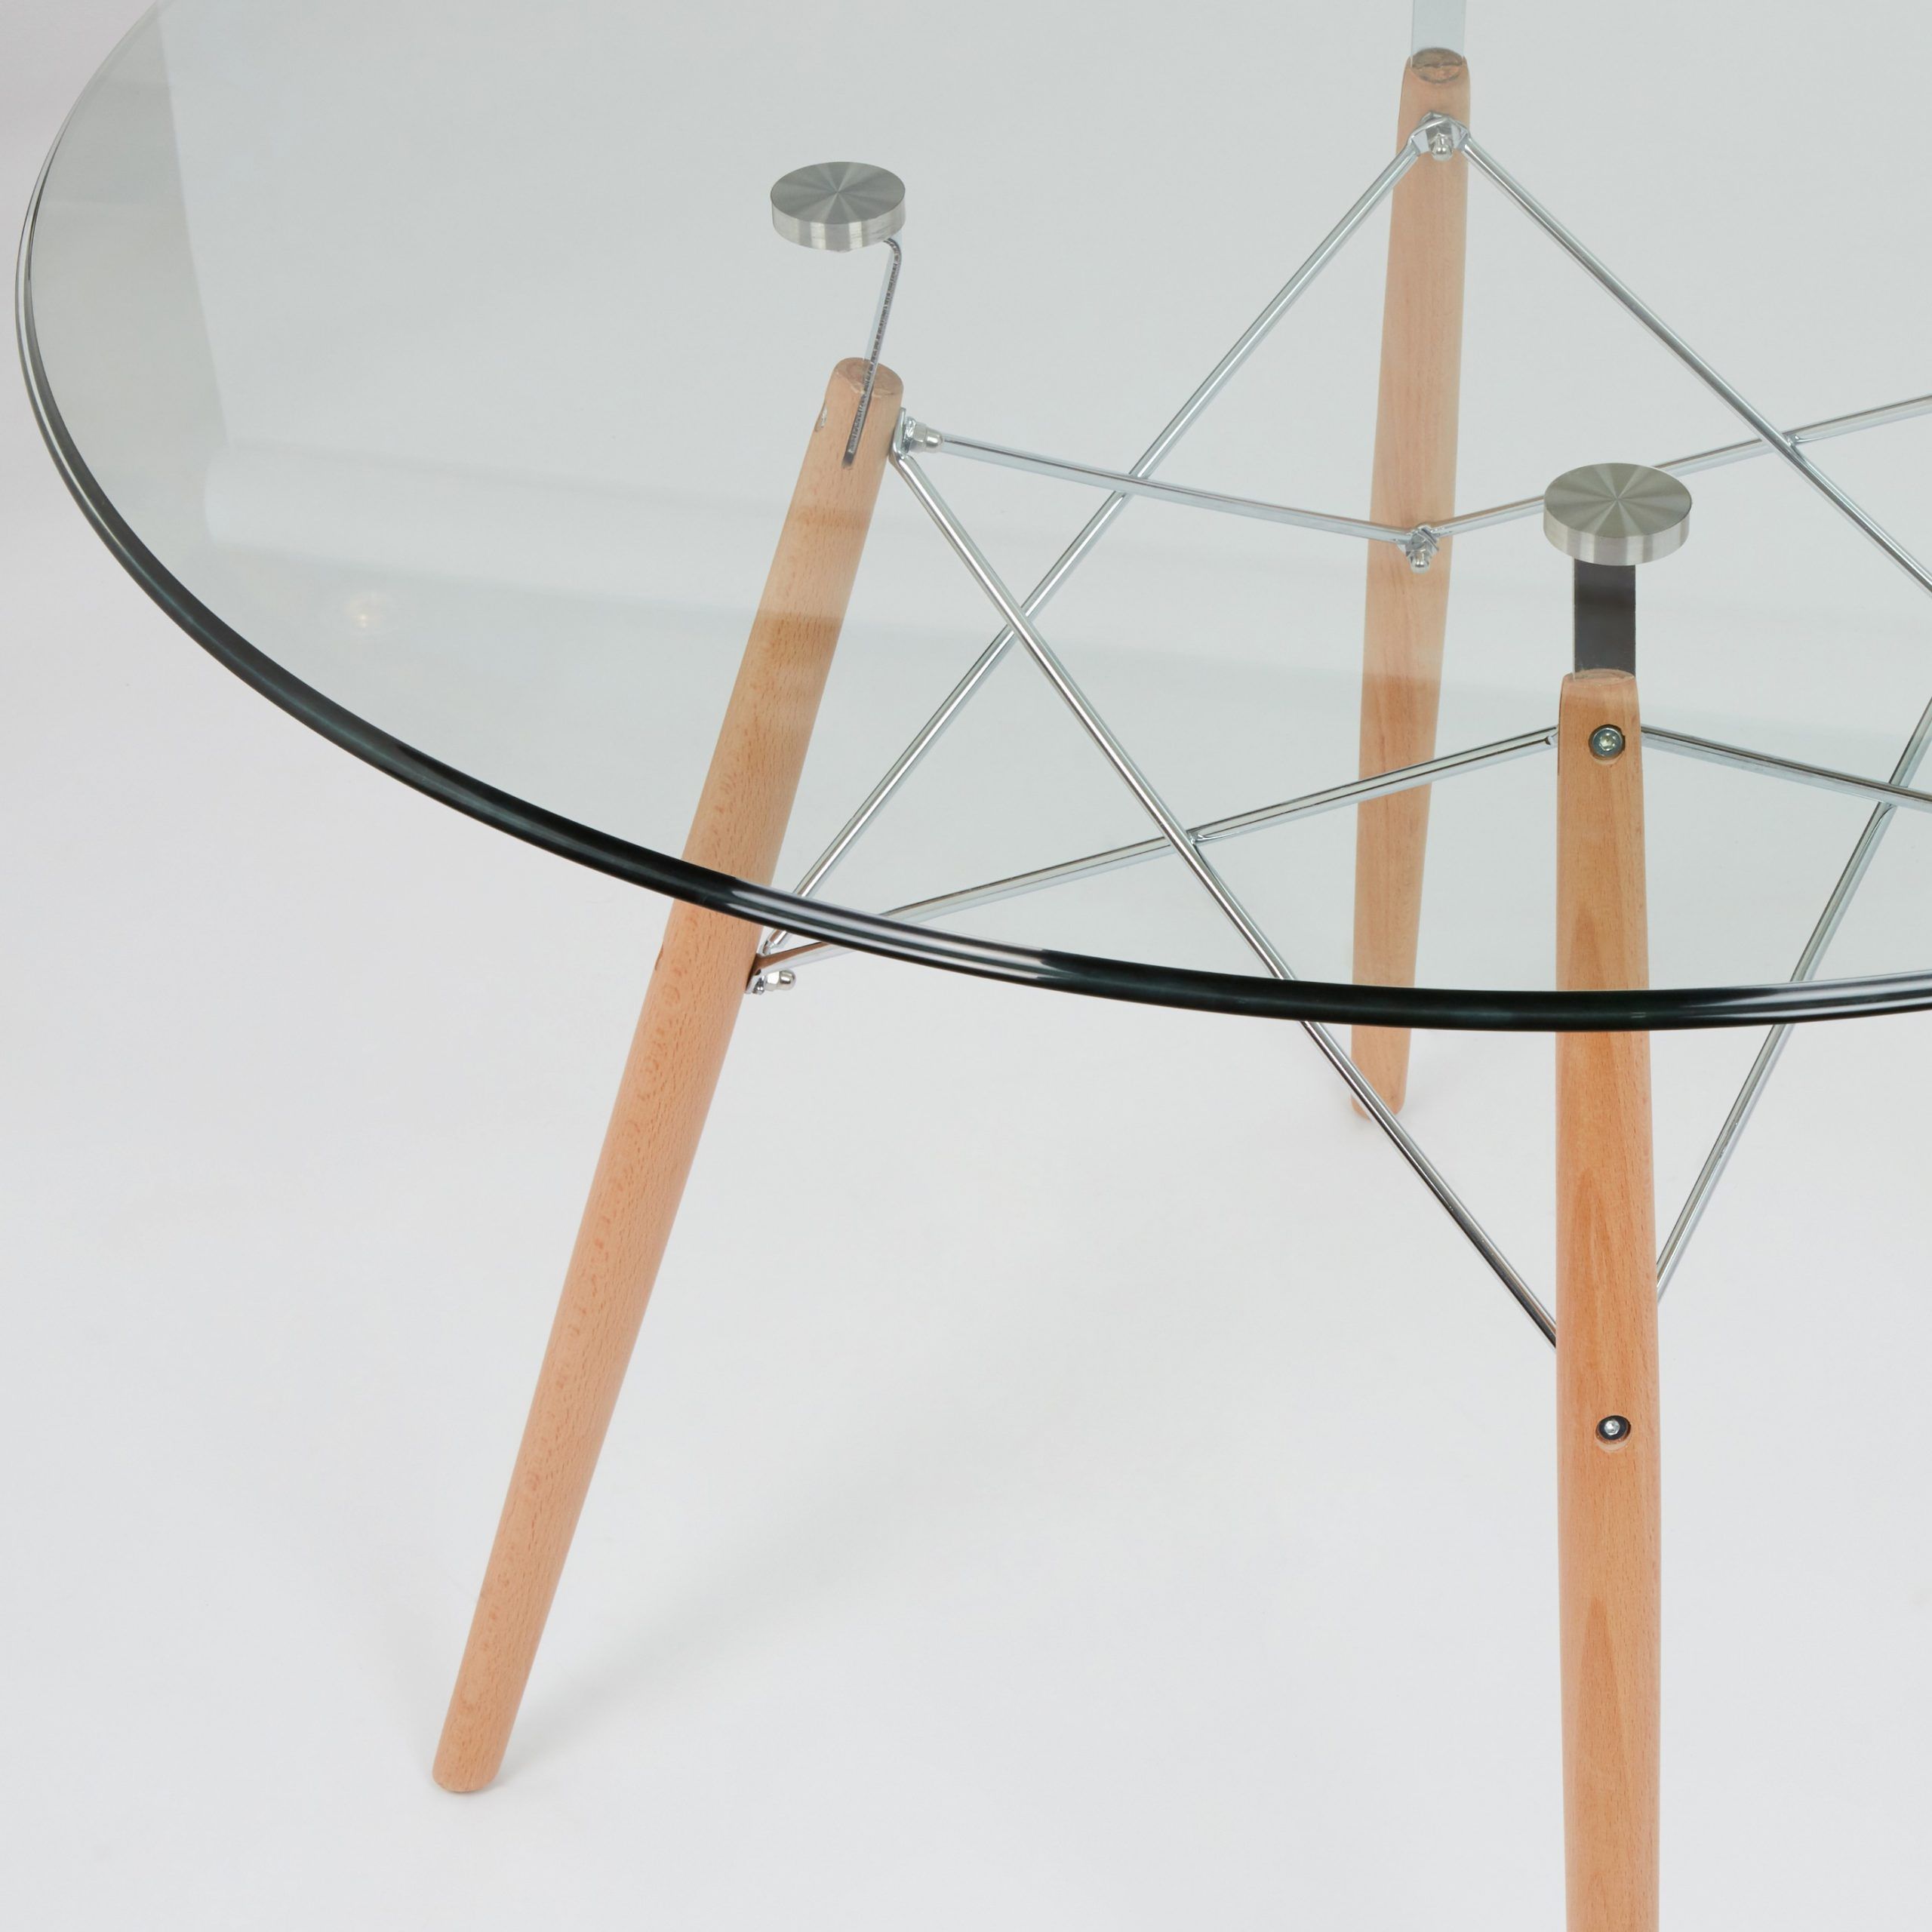 Eames Style Dining Tables With Chromed Leg And Tempered Glass Top In Most Recent Dining Glass Table With Beechwood Legs (size: 100cm (View 12 of 25)